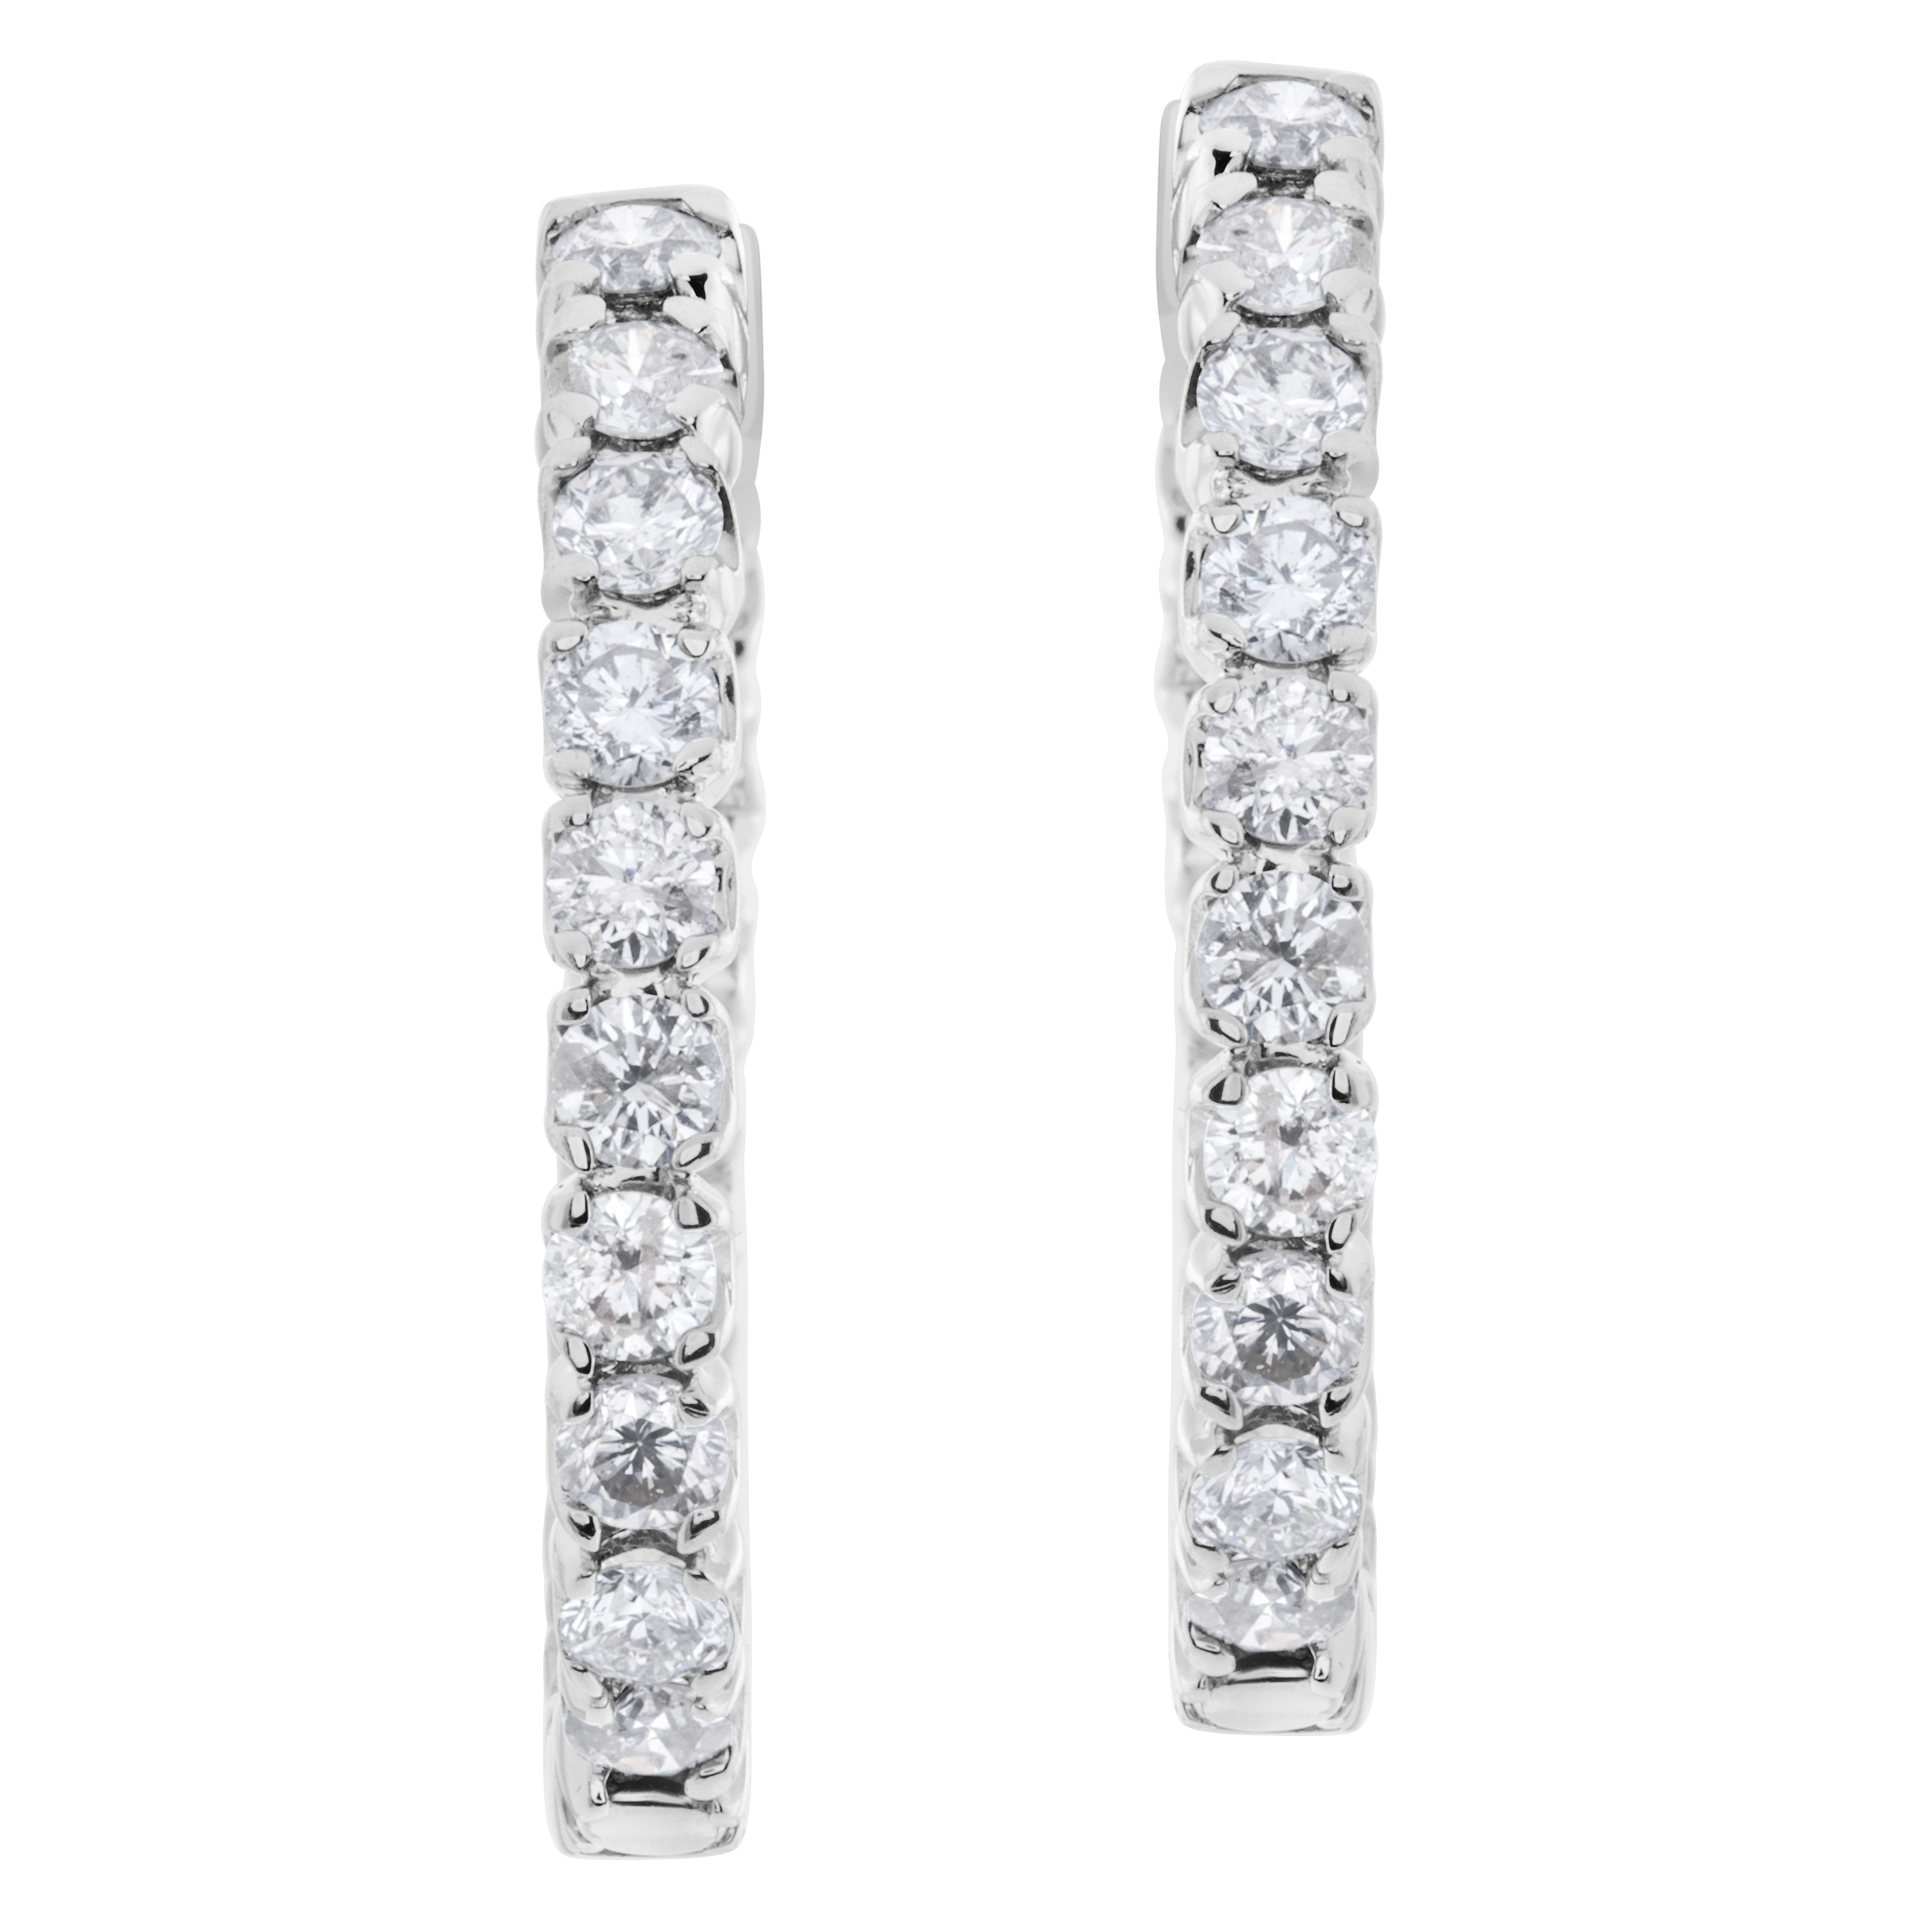 Diamond hoop earrings in 14k white gold with over 3 carats in round diamonds. 1 inch diameter image 1